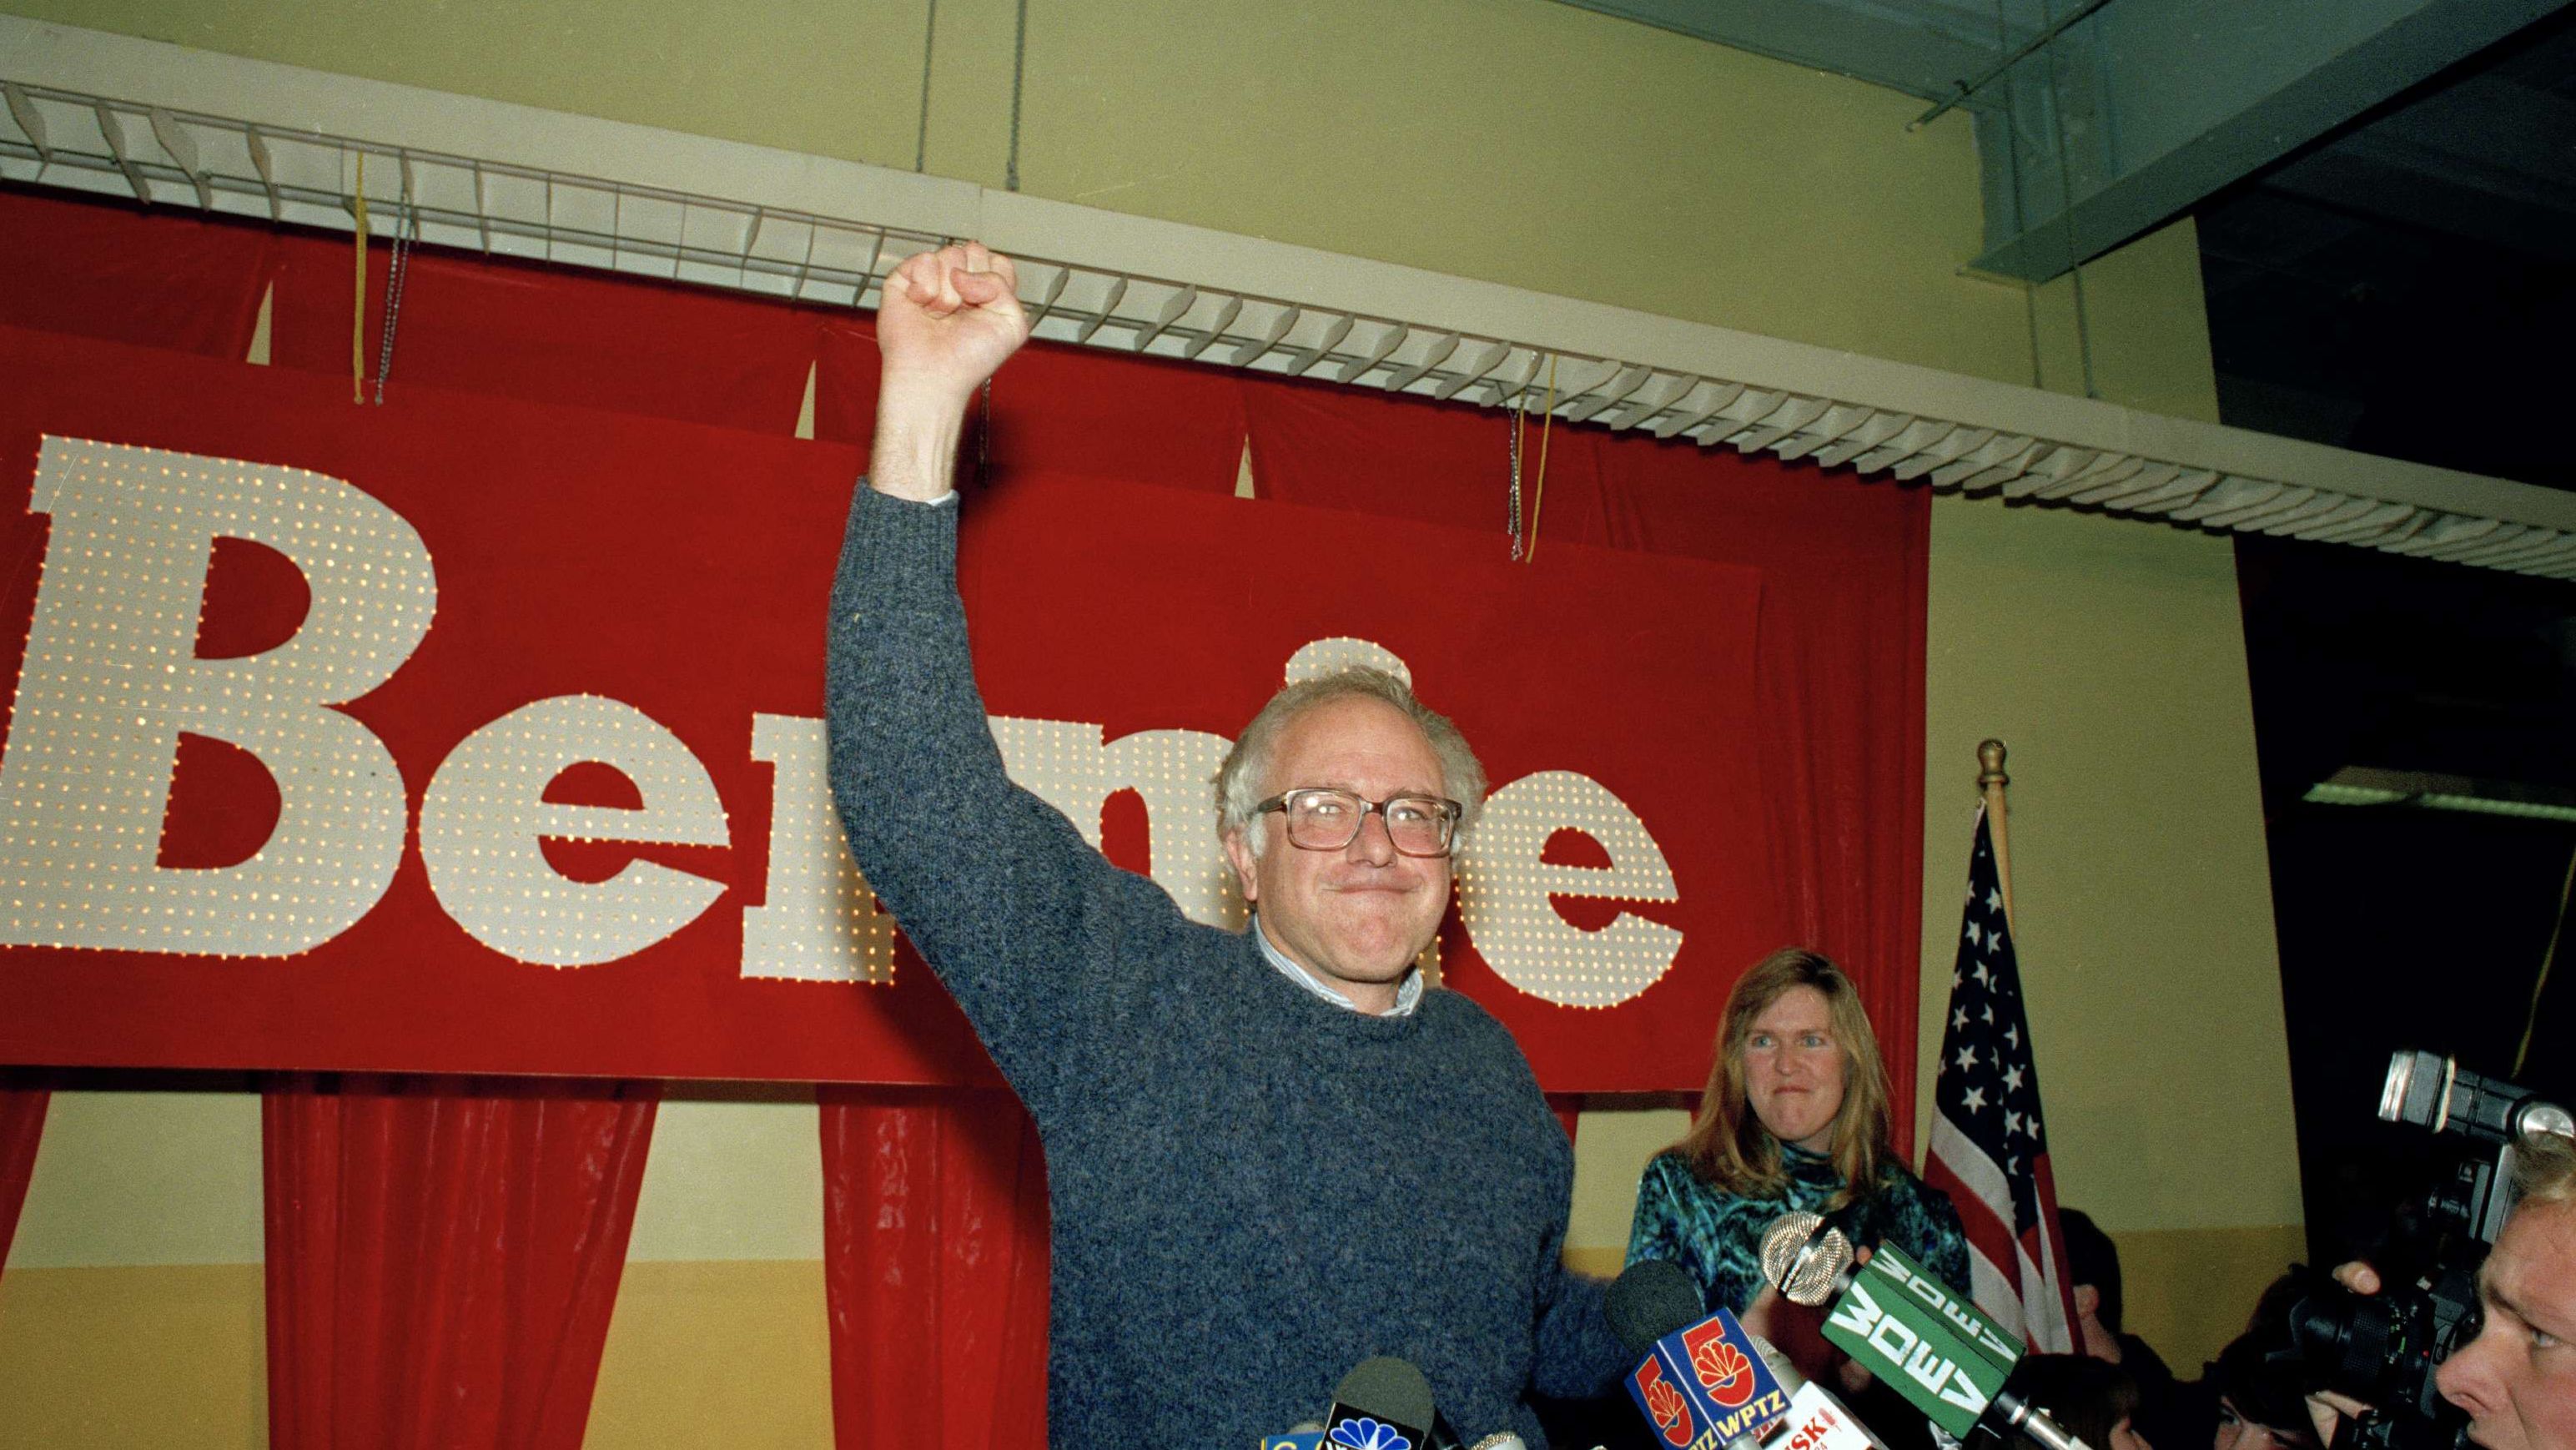 In 1990, Sanders defeated US Rep. Peter Smith in the race for Vermont's lone House seat. He won by 16 percentage points.